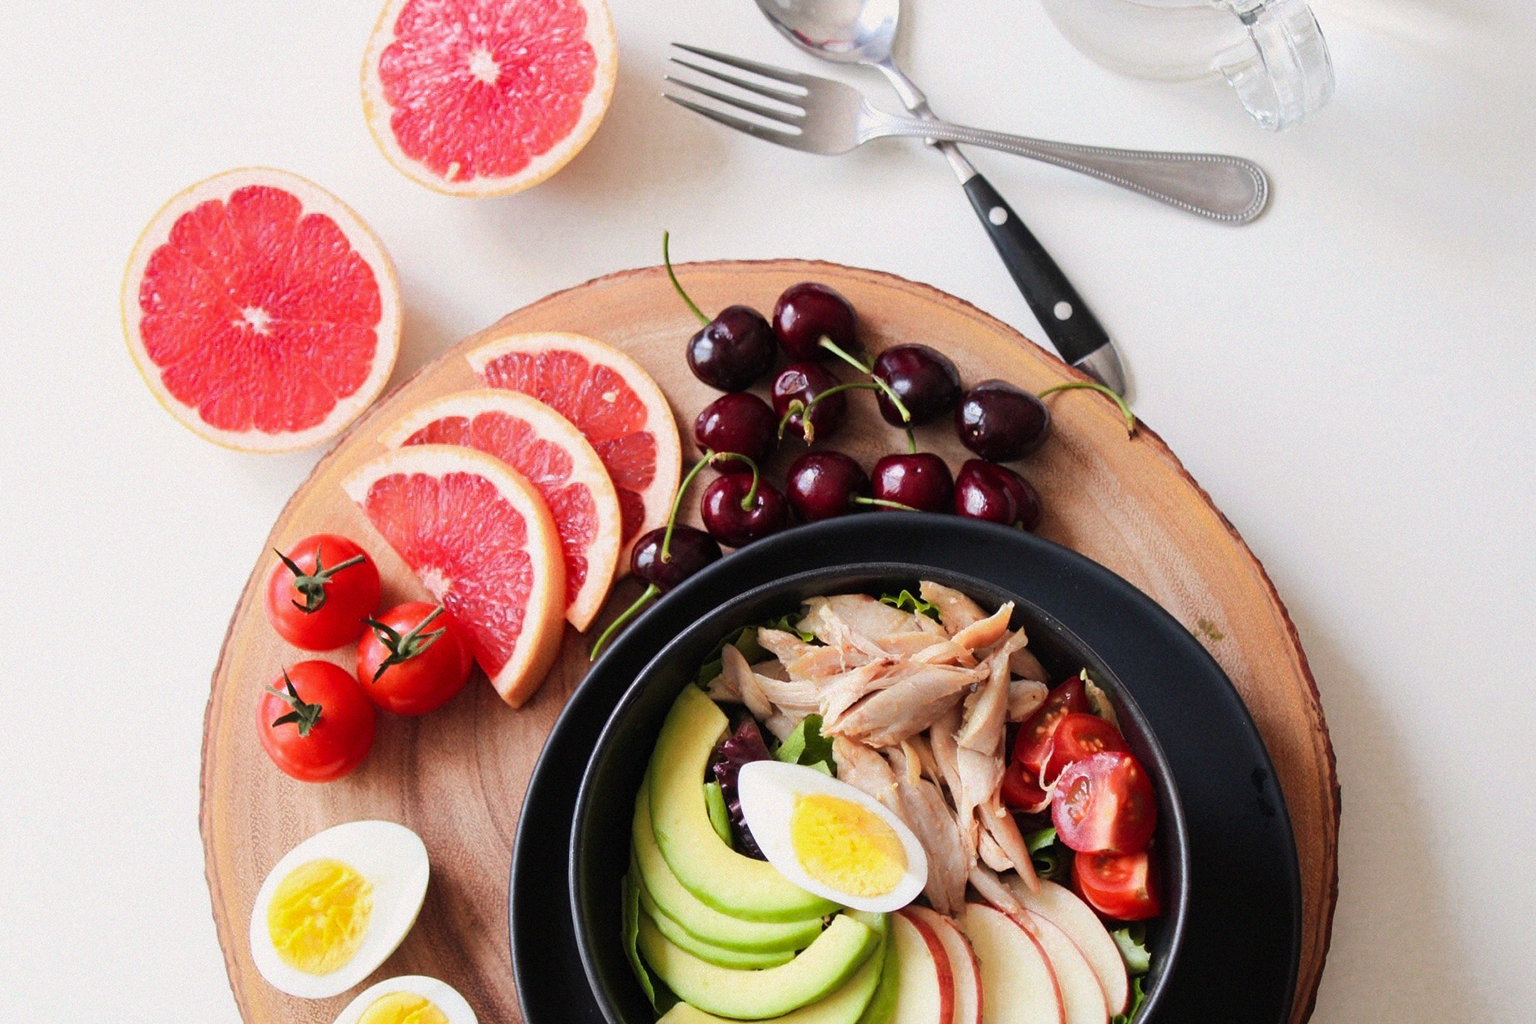 Top-down view of a healthy salad featuring avocado, grapefruit, cherries, and hard-boiled egg.